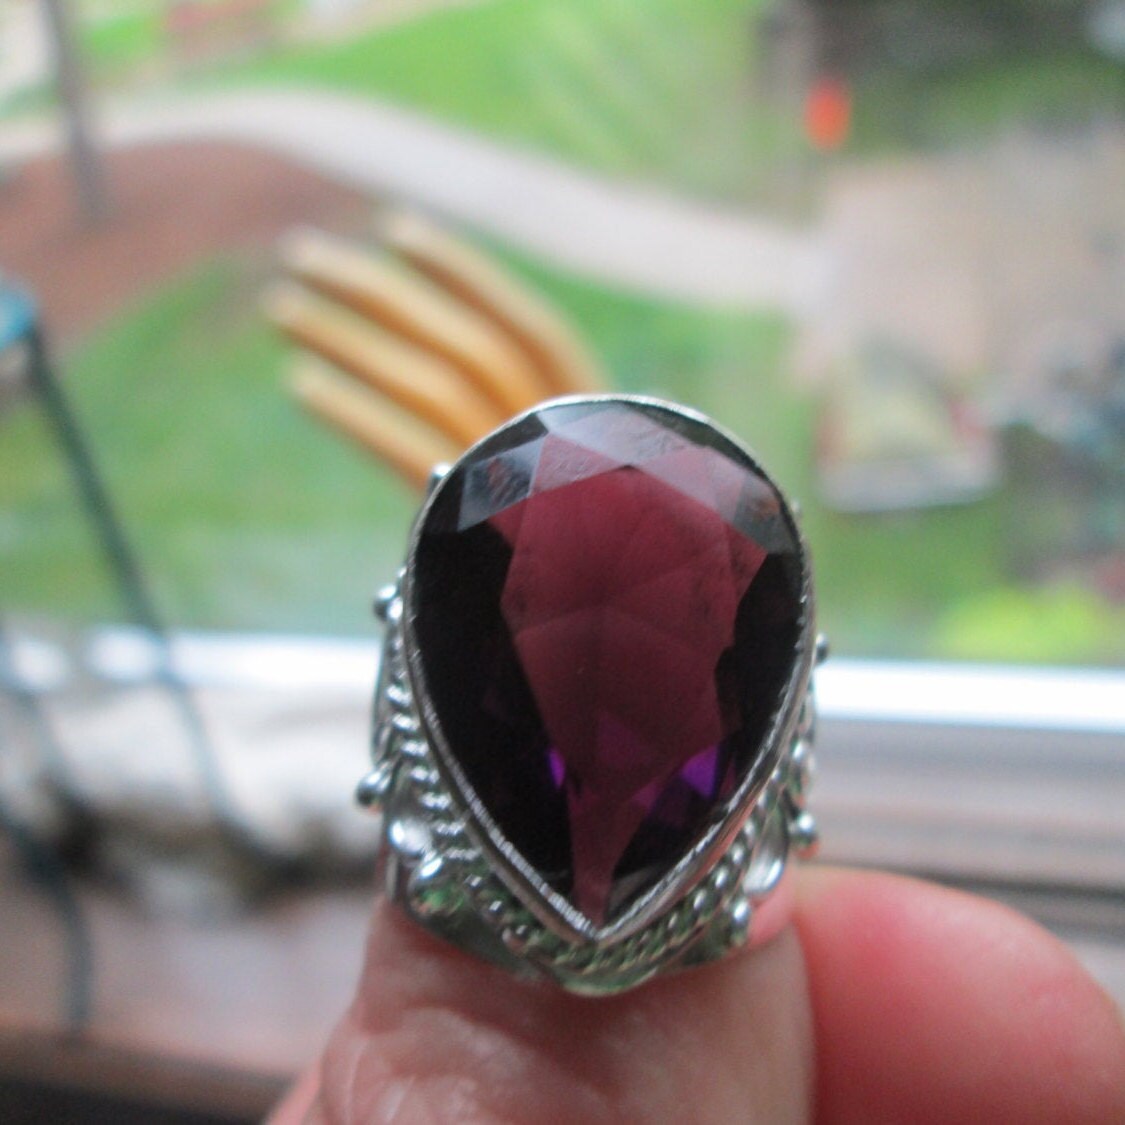 Excited to share the latest addition to my #etsy shop: Genuine 5.00CT Amethyst Purple 925 Sterling Silver Ring Size 8, Weight 9.1 Grams etsy.me/3VBT51e #purple #amethyst #unisexadults #silver #925ringsz8 #genuineamethyst #purpleamethyst #sterlingsilverpolish #s